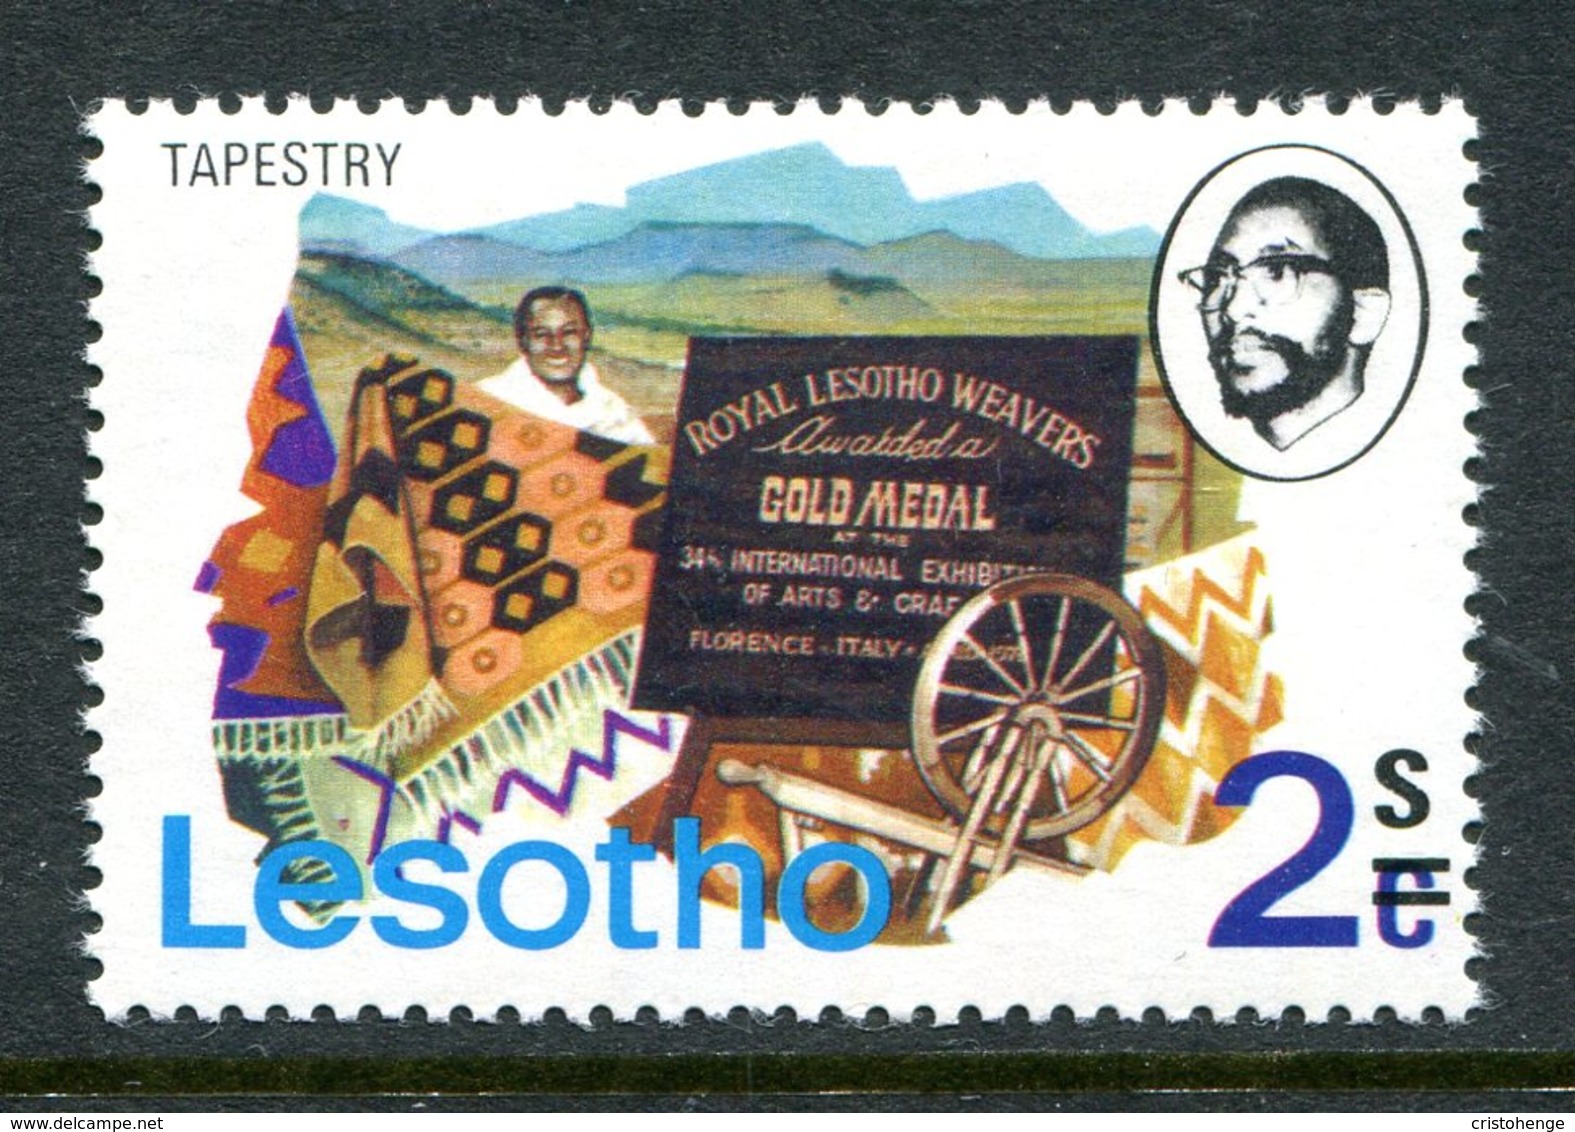 Lesotho 1980-81 New Currency - Litho Overprint - Wmk. - 2s On 2c Tapestry MNH (SG 402B) - Lesotho (1966-...)